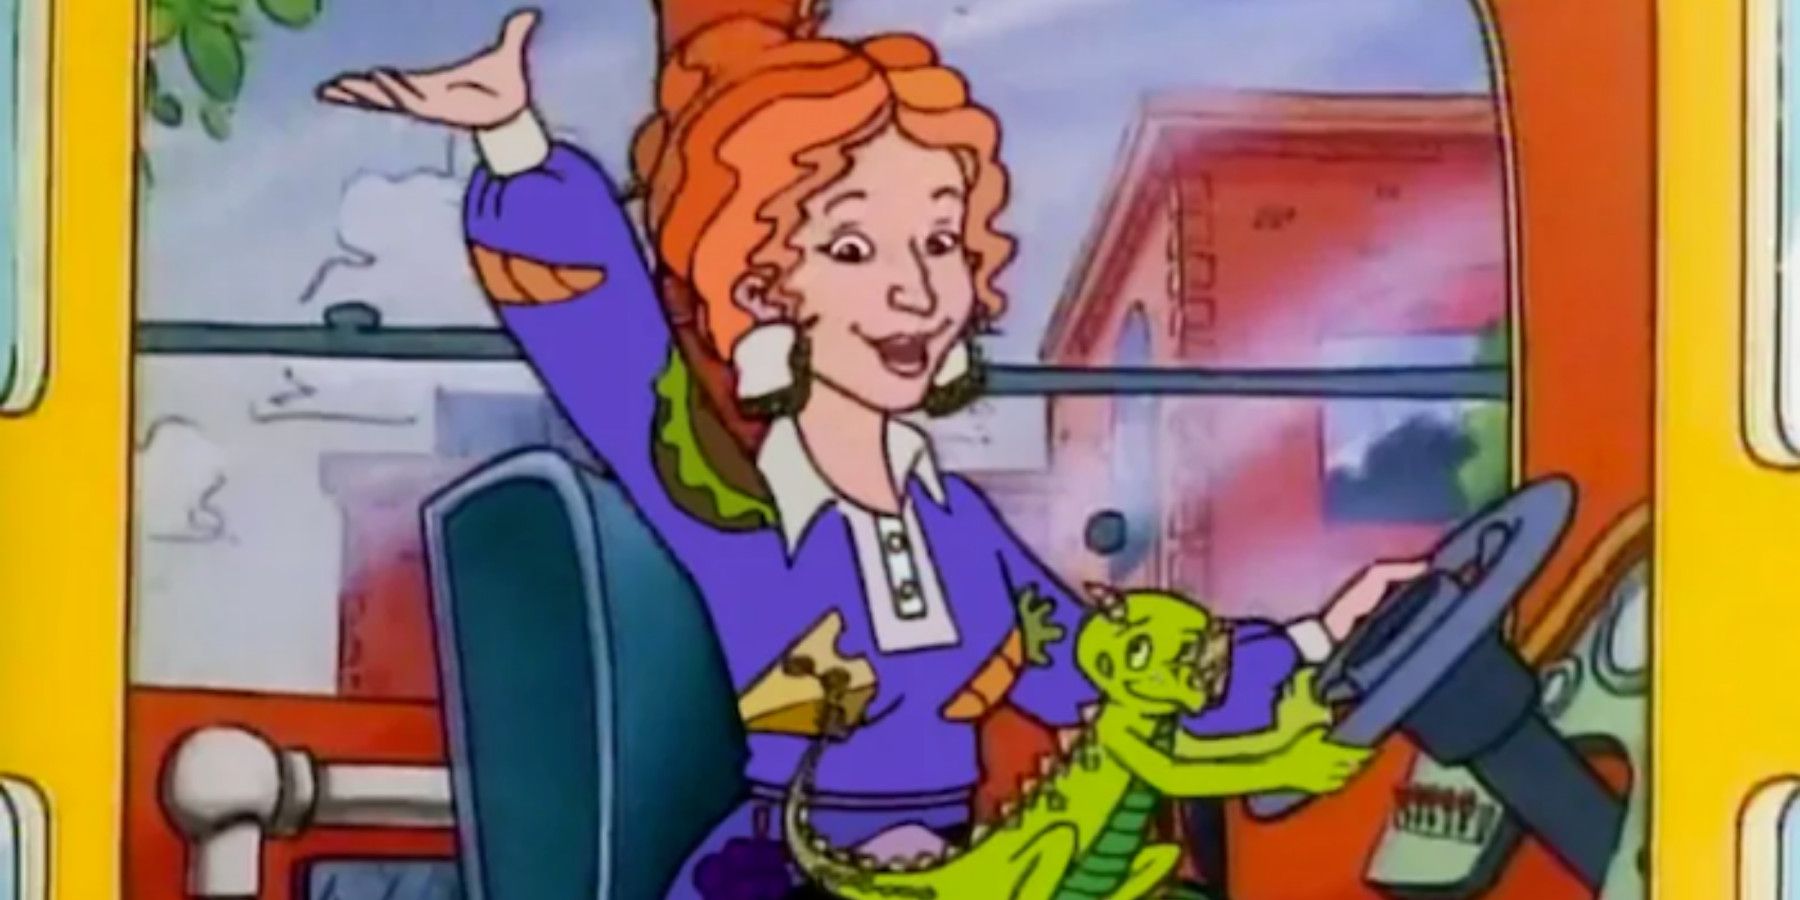 Disney Dreamlight Valley Player Makes Their Character Look Like Miss Frizzle